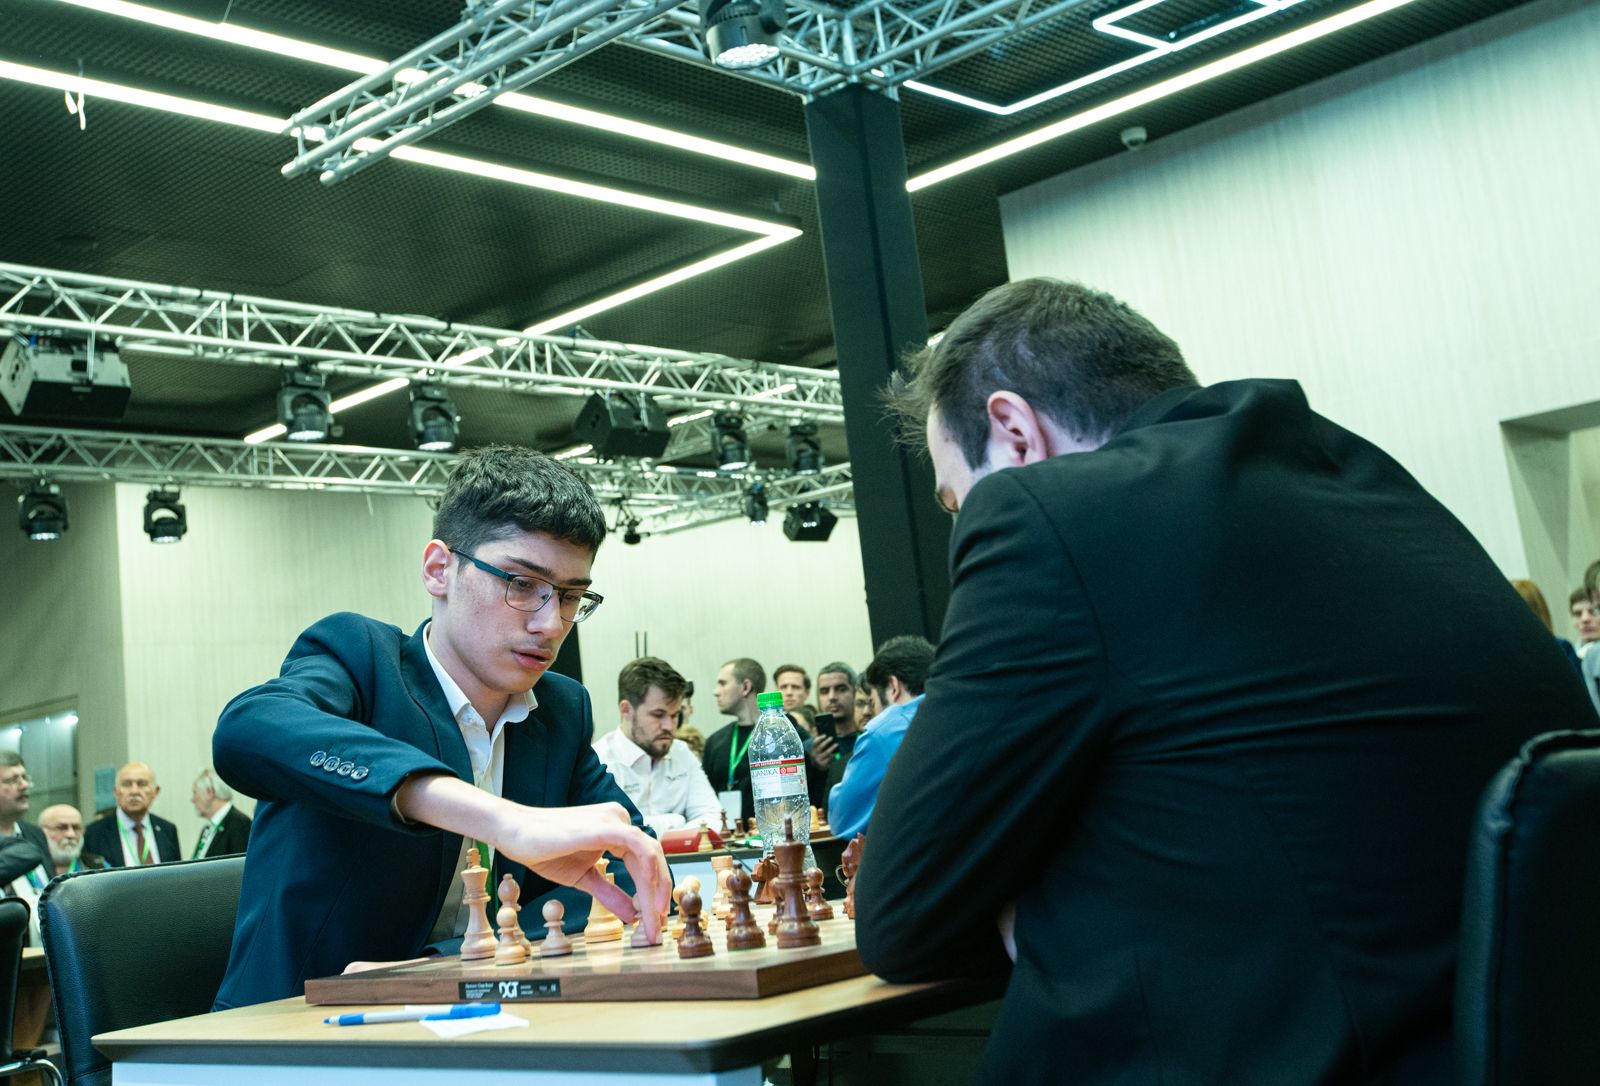 The 2019 World Rapid and Blitz recap: How will the event be remembered